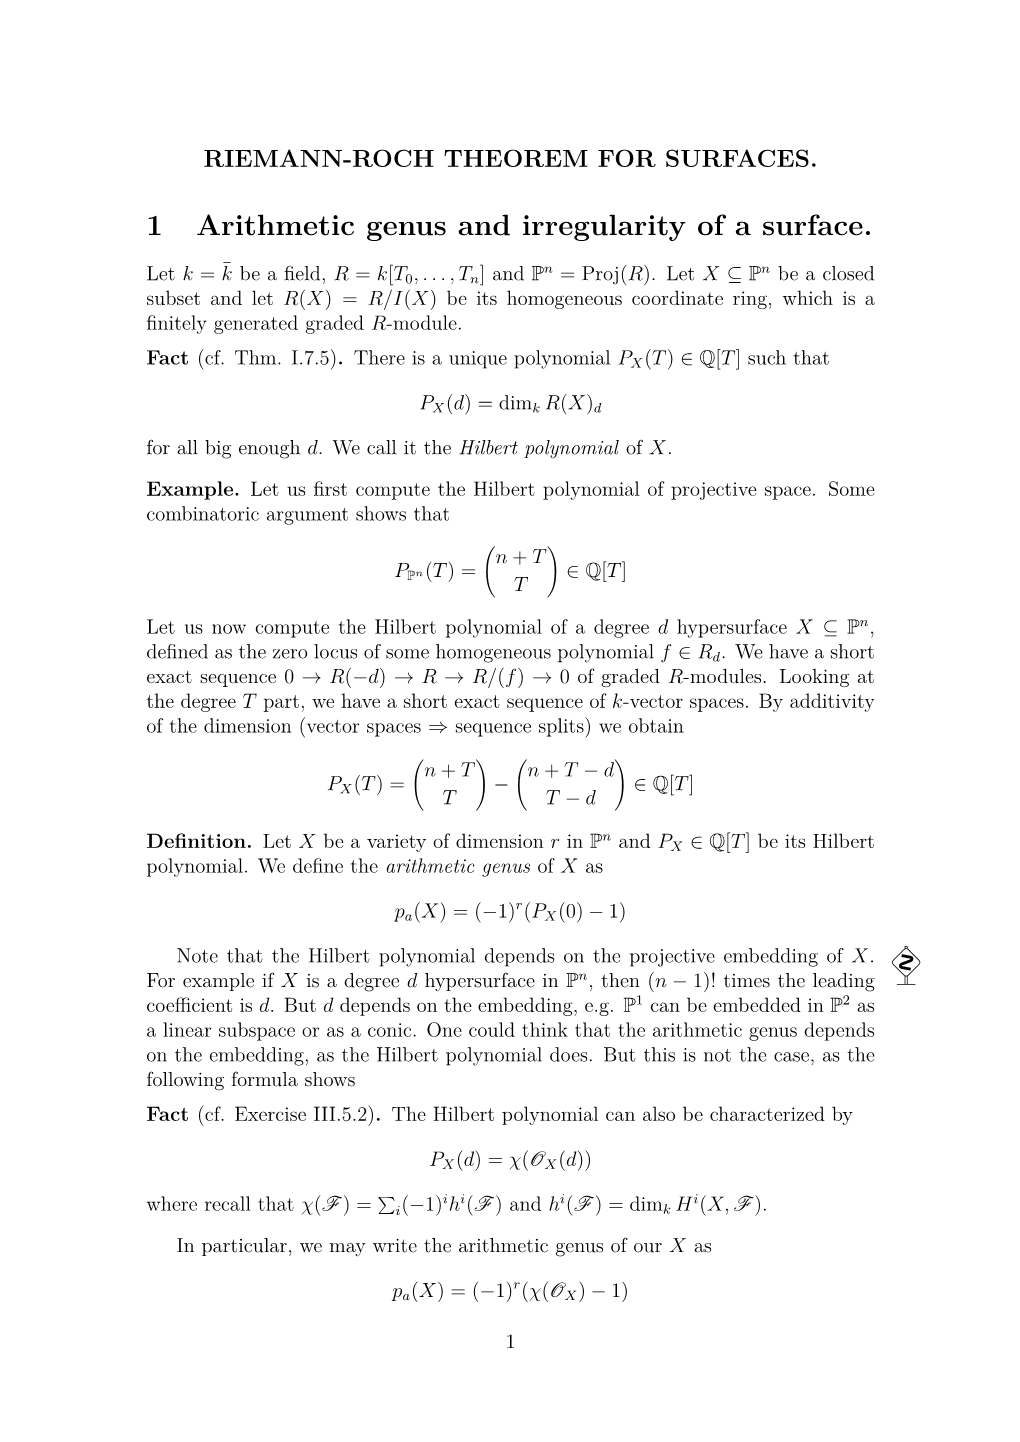 1 Arithmetic Genus and Irregularity of a Surface